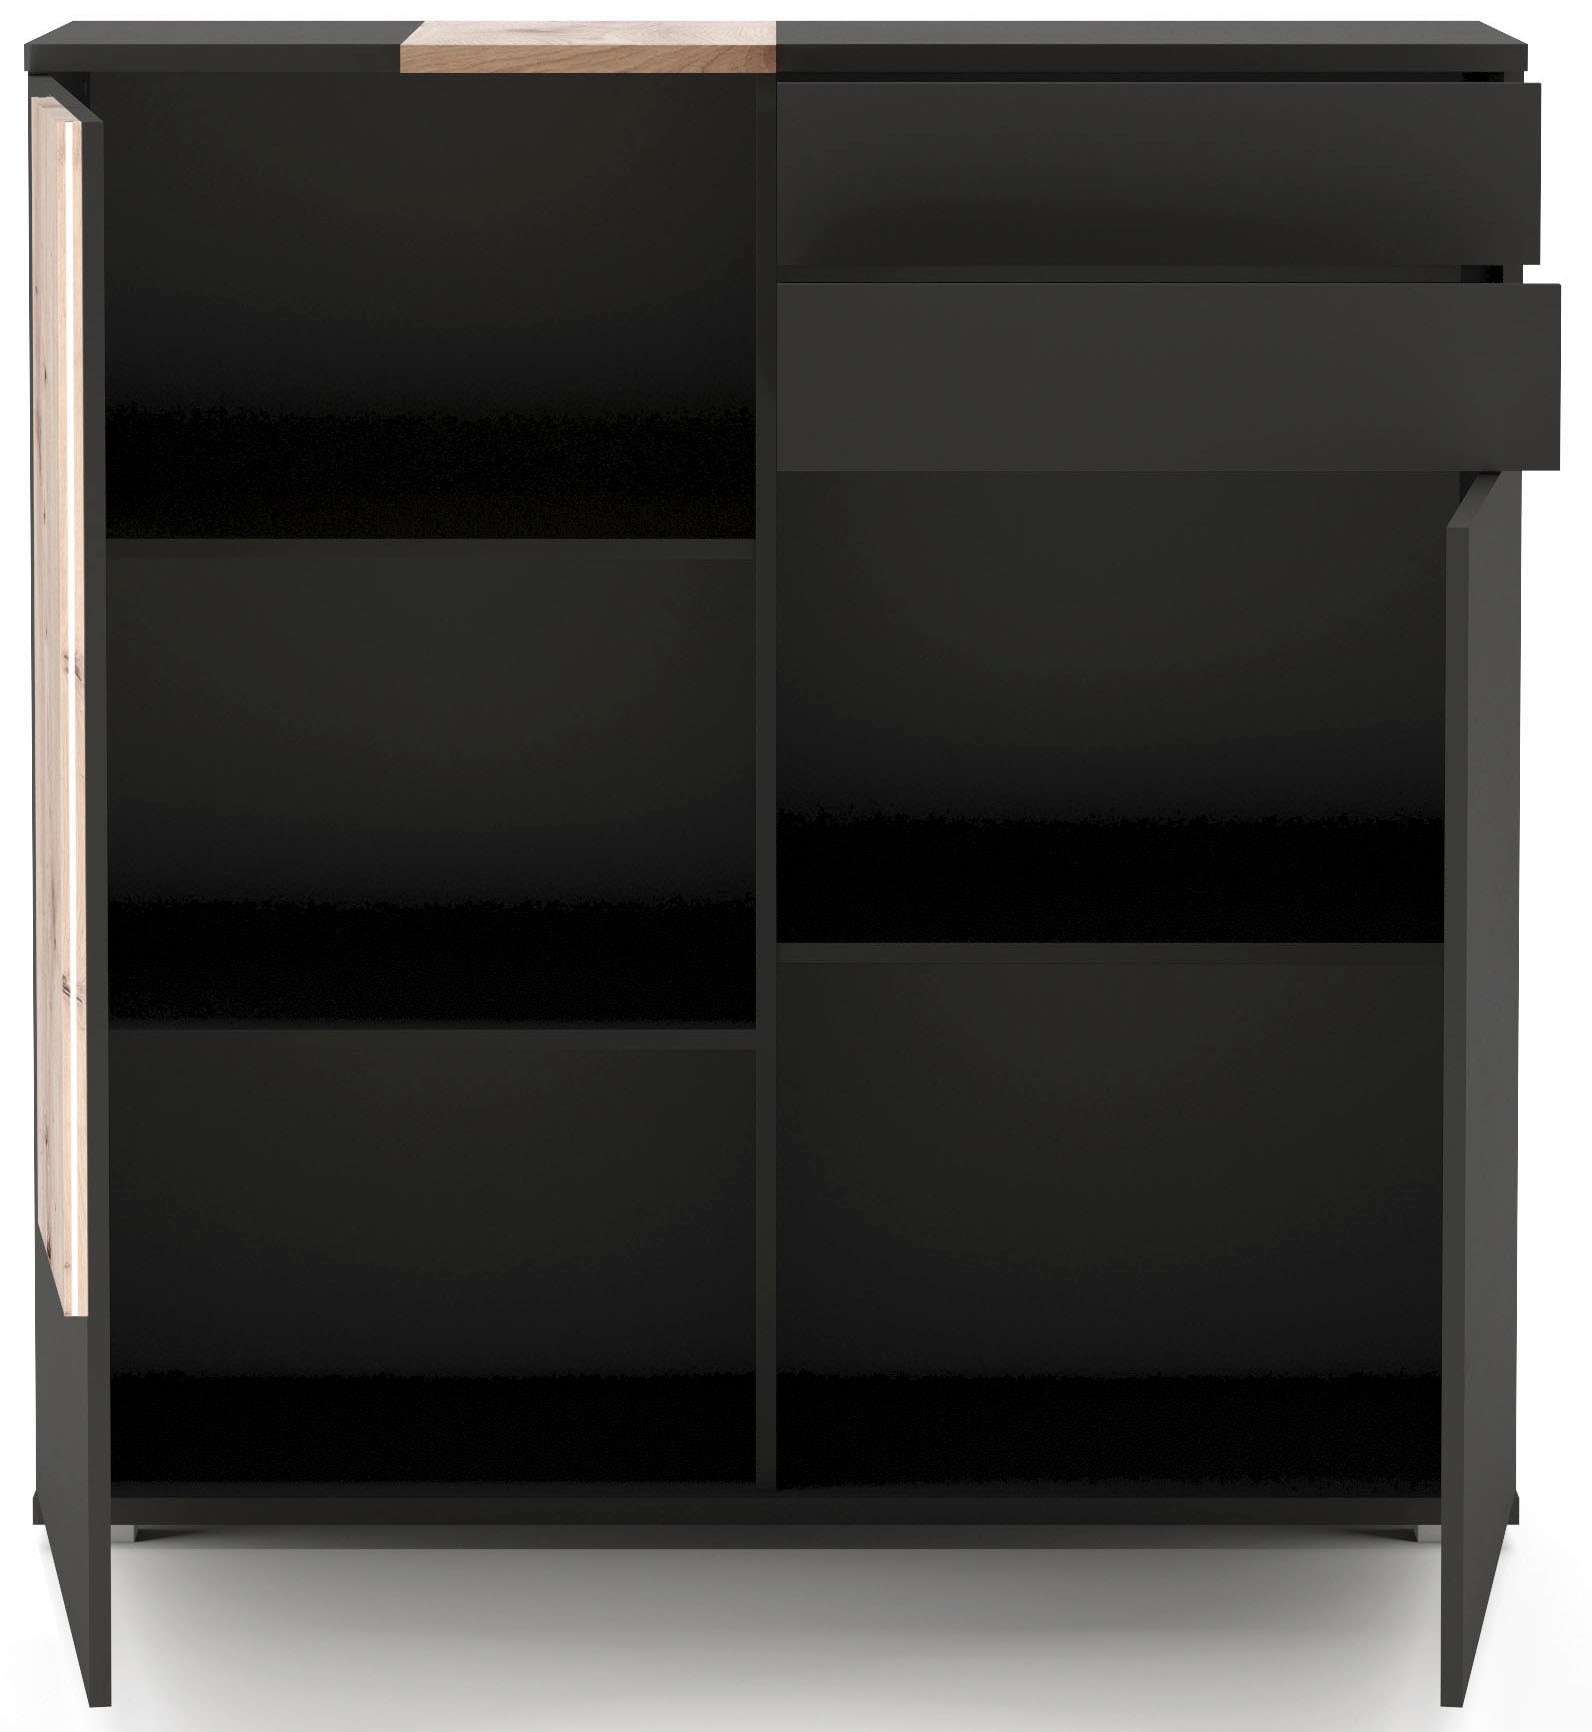 COTTA Highboard »Montana«, inkl. LED-Beleuchtung, mit Push-To-Open, Breite 120 cm